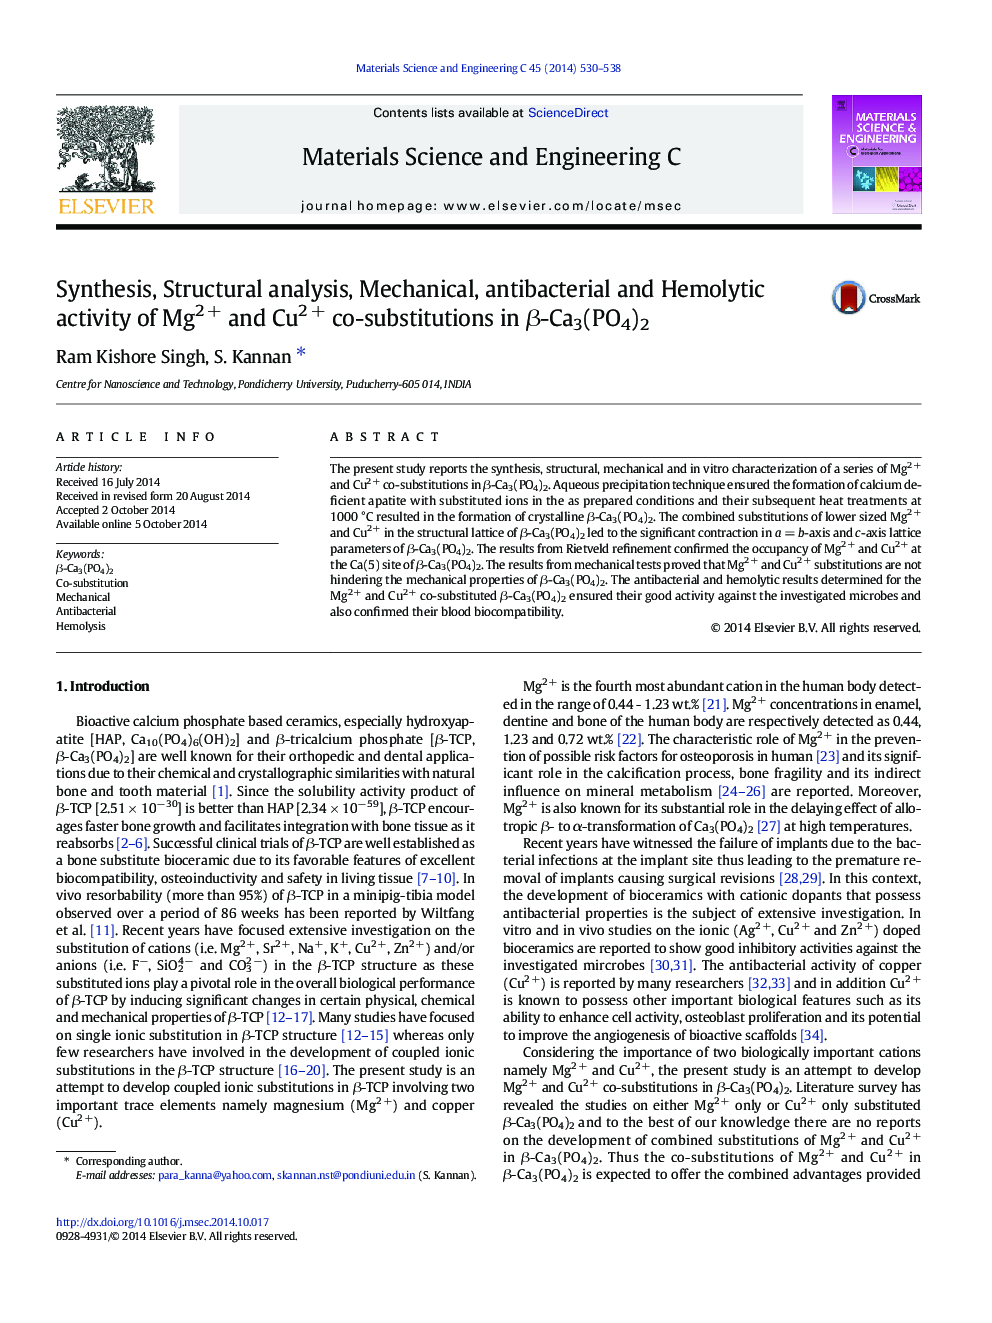 Synthesis, Structural analysis, Mechanical, antibacterial and Hemolytic activity of Mg2 + and Cu2 + co-substitutions in β-Ca3(PO4)2